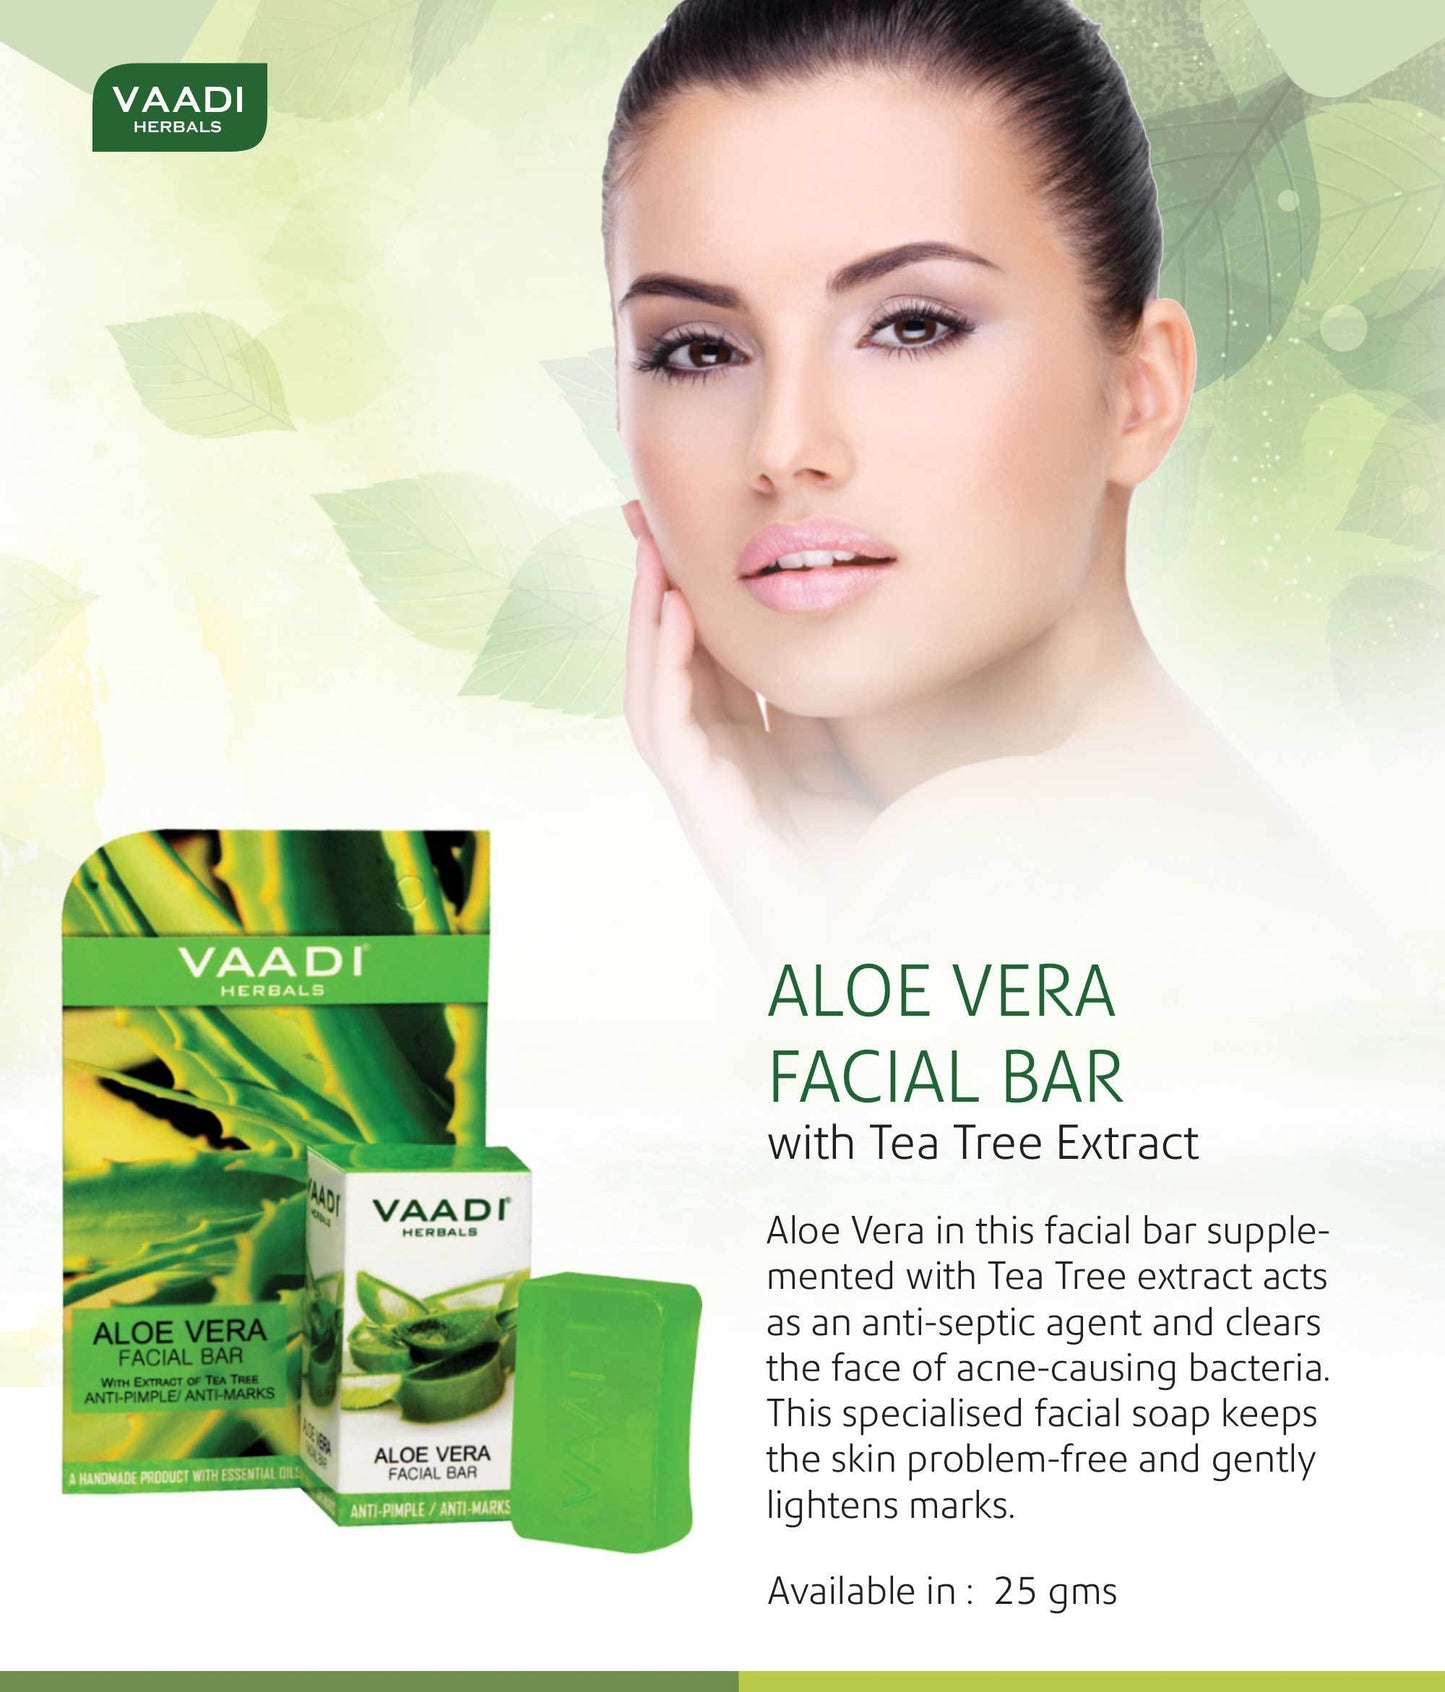 Organic Aloe Vera Facial Bar with Tea Tree and Honey - Reduces Acne - Keeps Skin Infection Free (4 x 25 gms/0.9 oz)